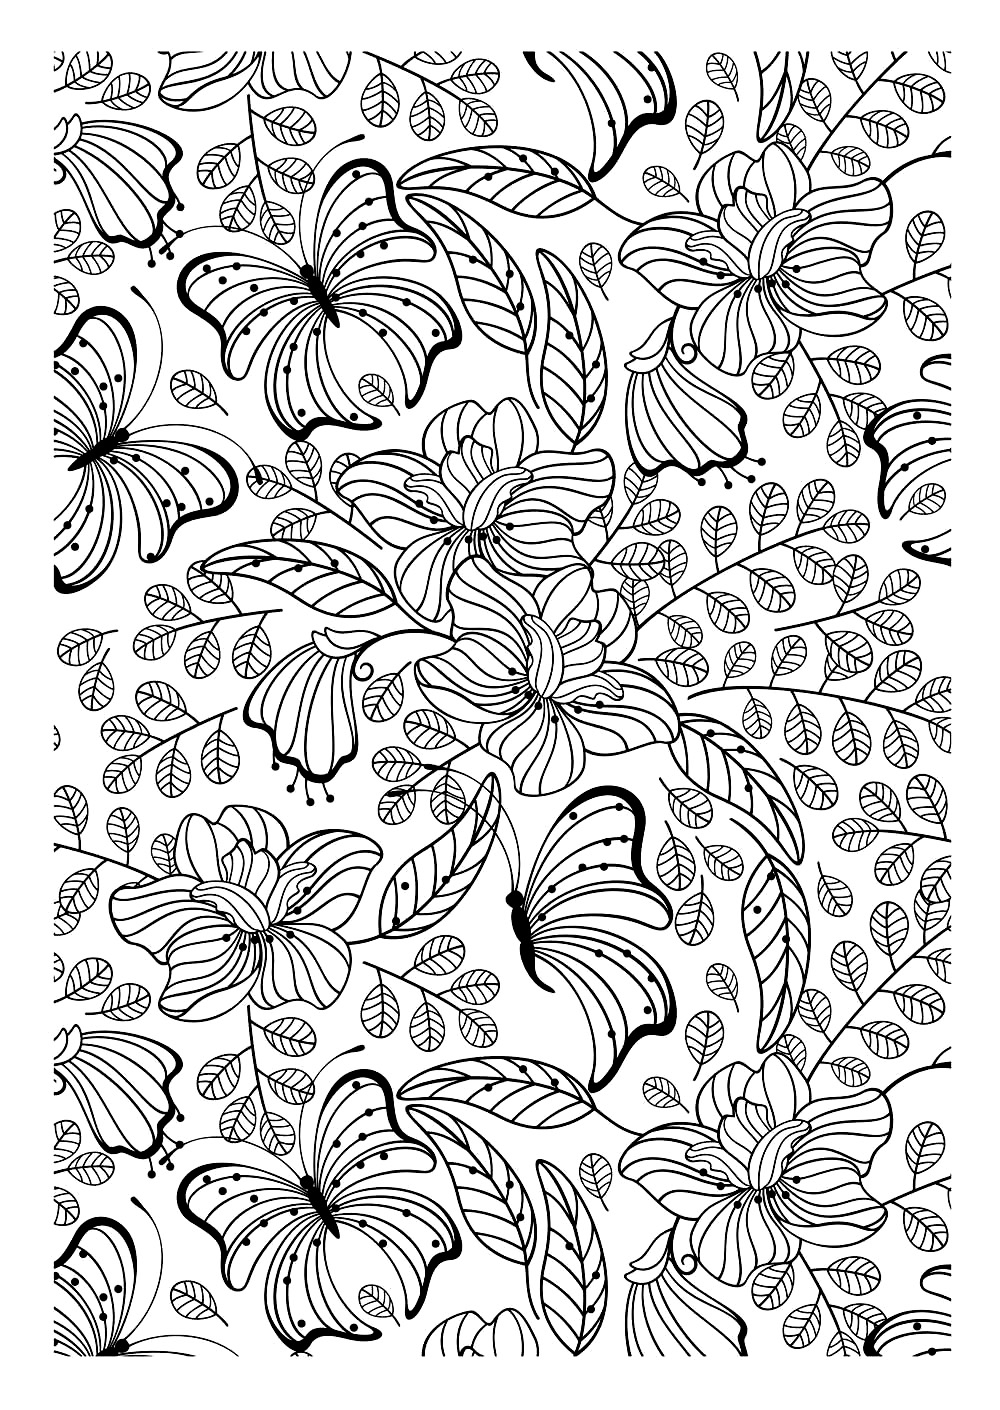 Butterflies drawing to print and color